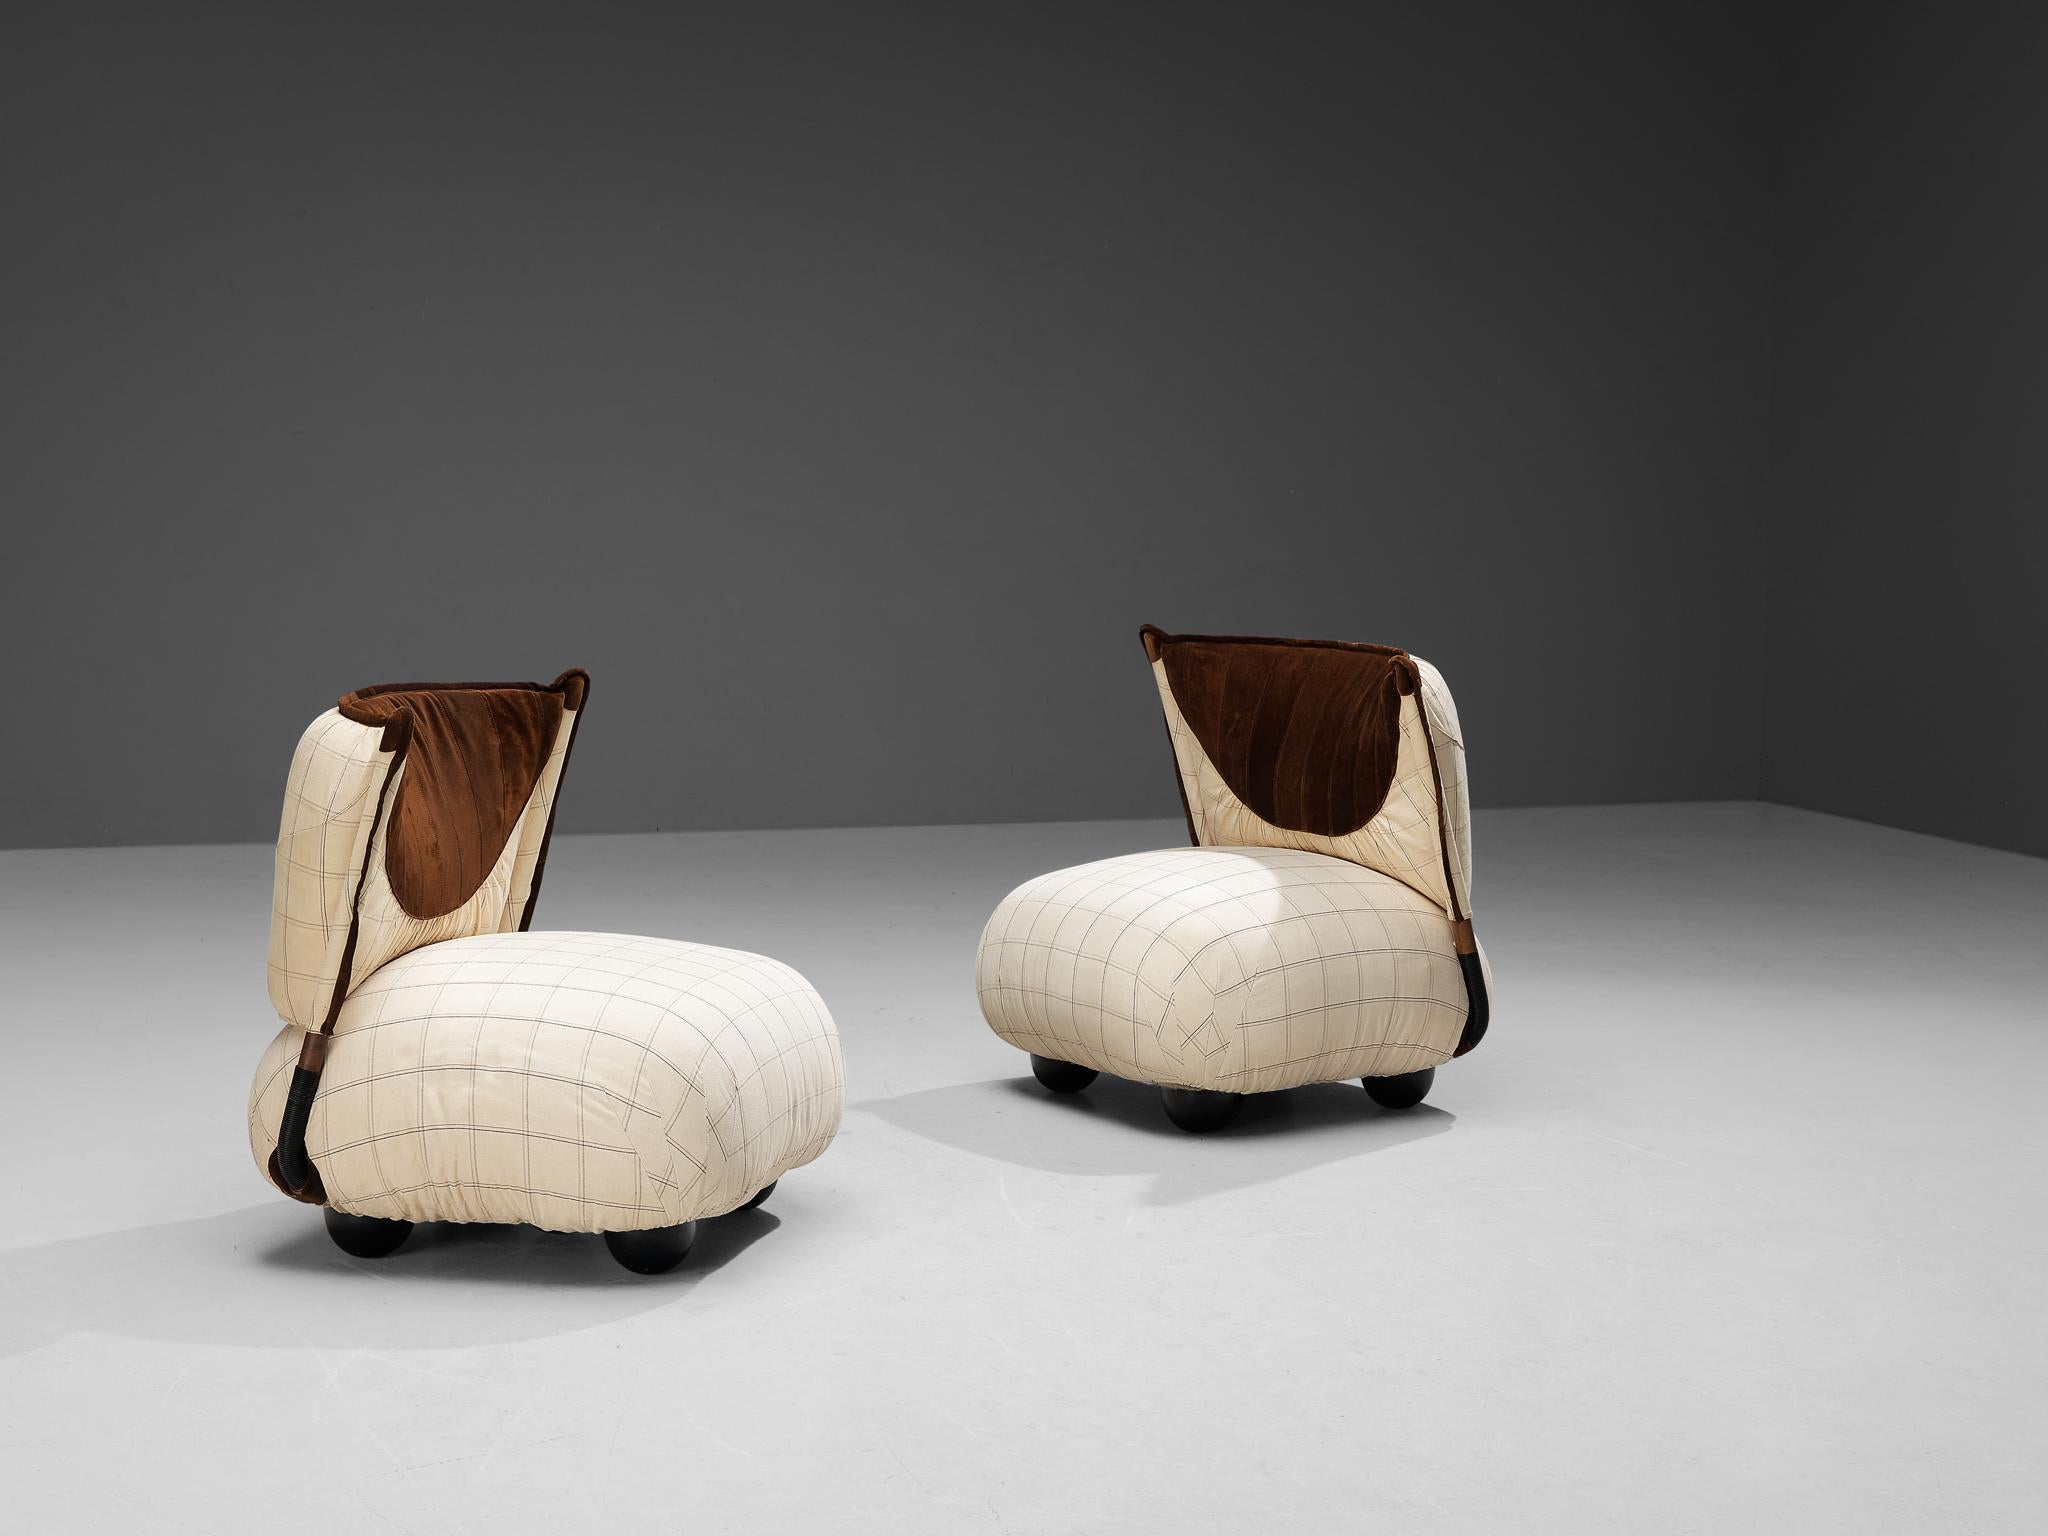 Fun and quirky pair of lounge chairs by Alessandro Becchi. These chairs are made in Italy, and definitely breathe the spirit and the ethos of the seventies.
A bulky seat offers comfort and has a base of five dome shaped feet. The brown and off white